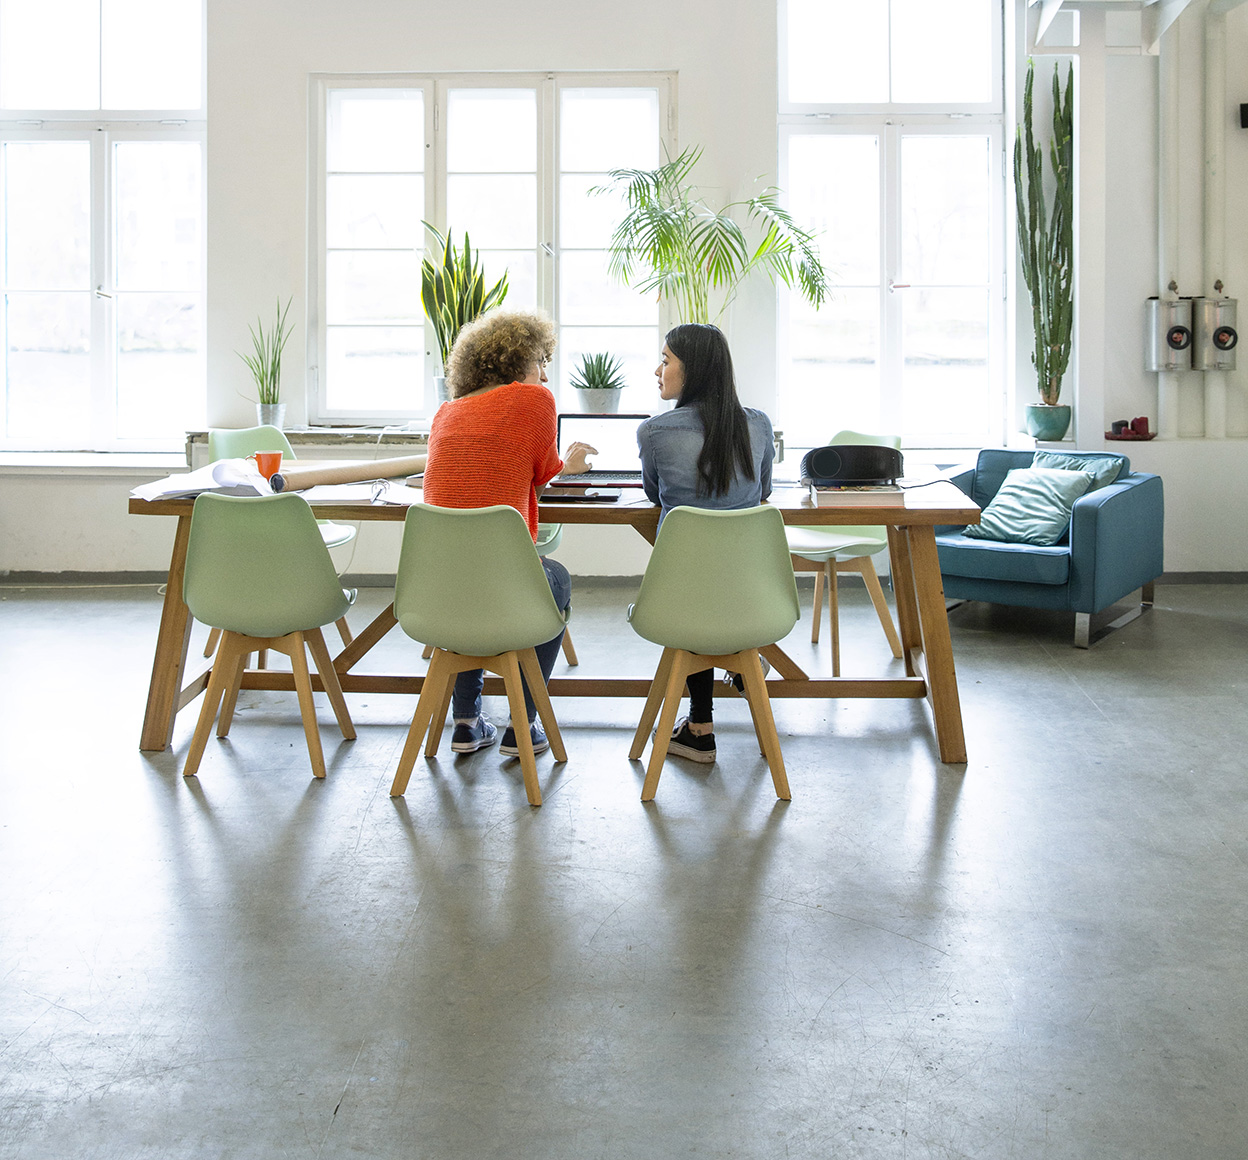 Two colleagues sitting at office table in open office